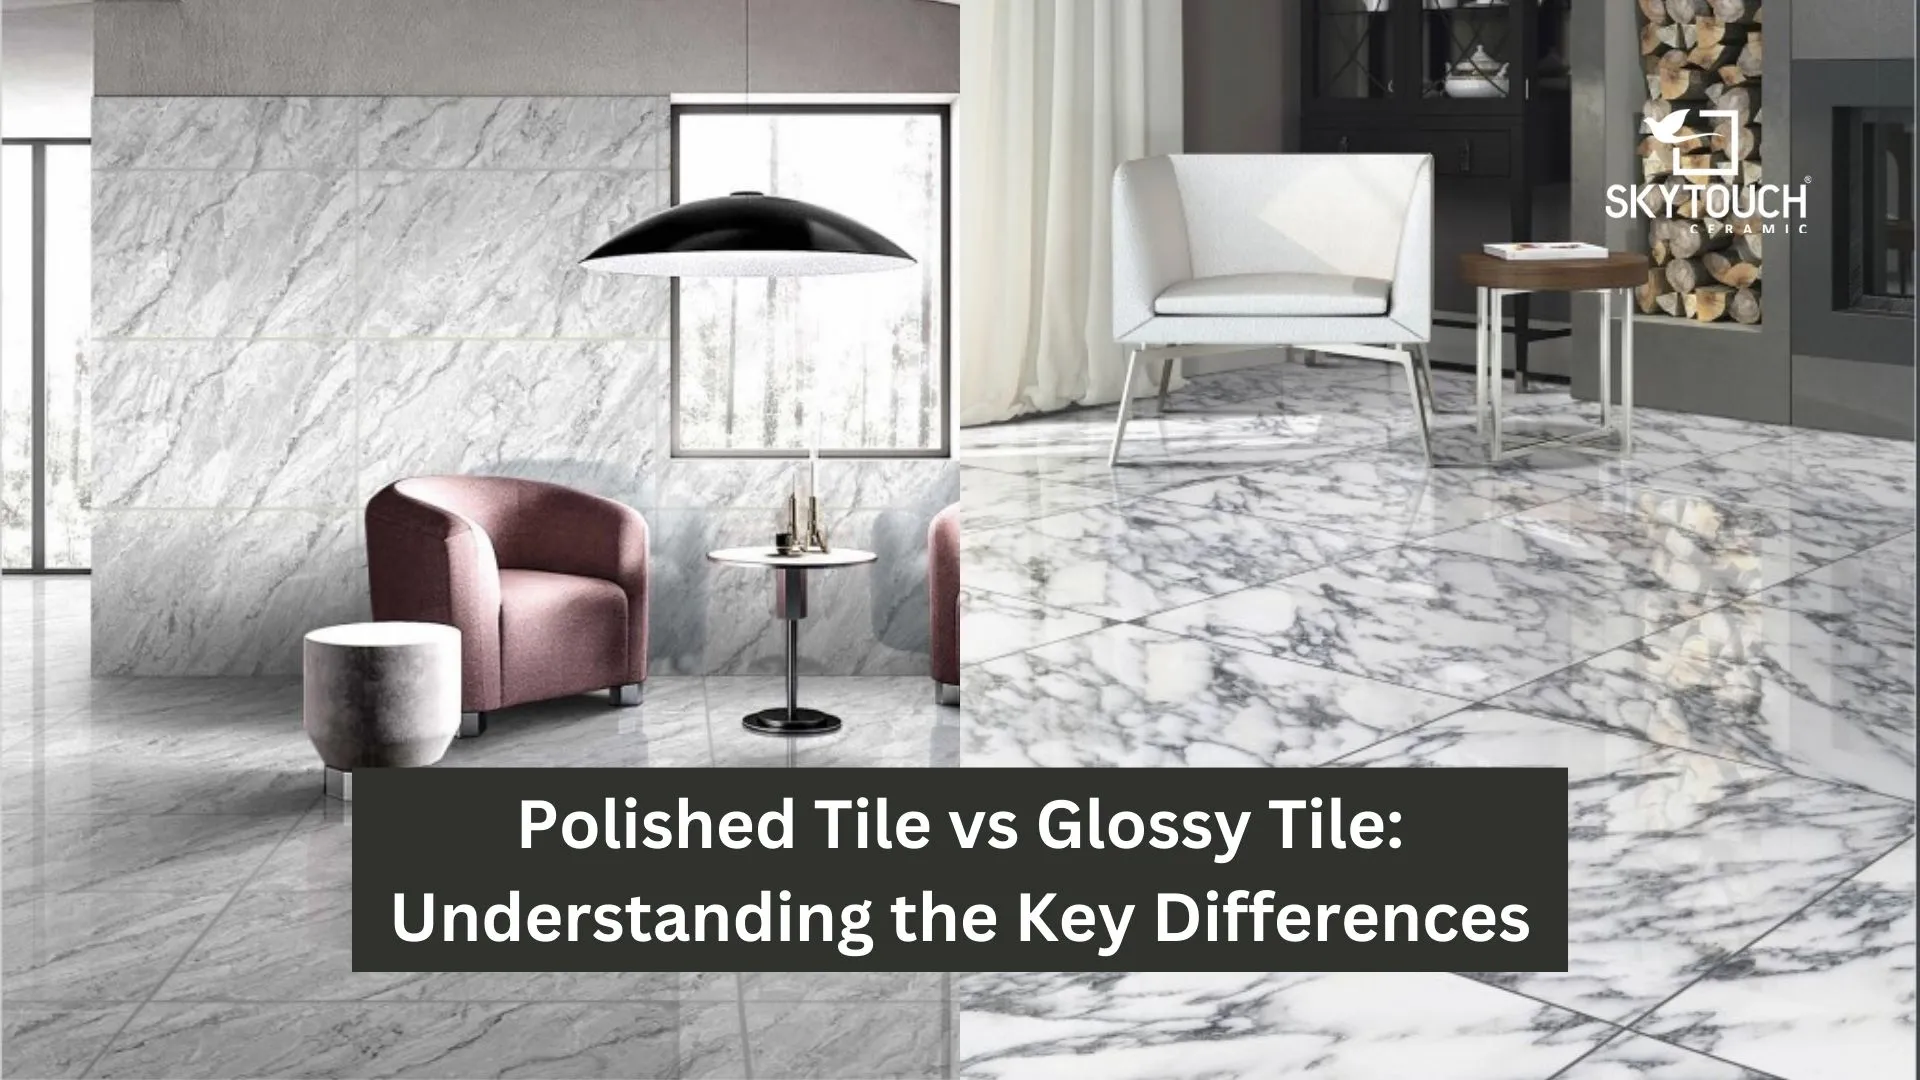 Polished Tile vs Glossy Tile: Understanding the Key Differences